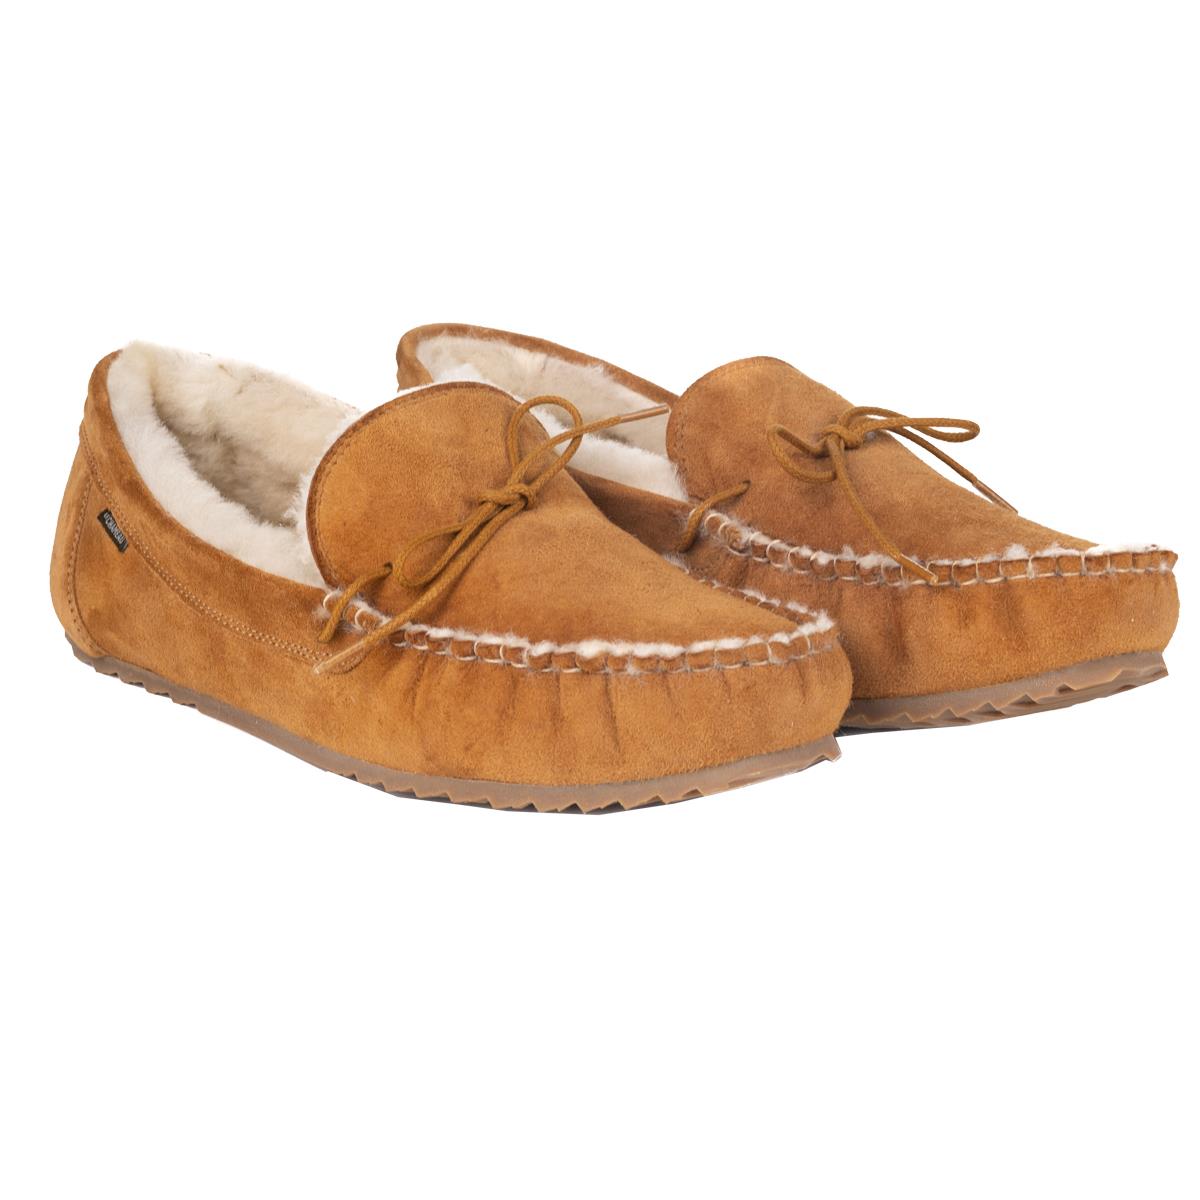 What is the return cost for Le Chameau Mens Moccasin Maison Slippers if they don't fit?